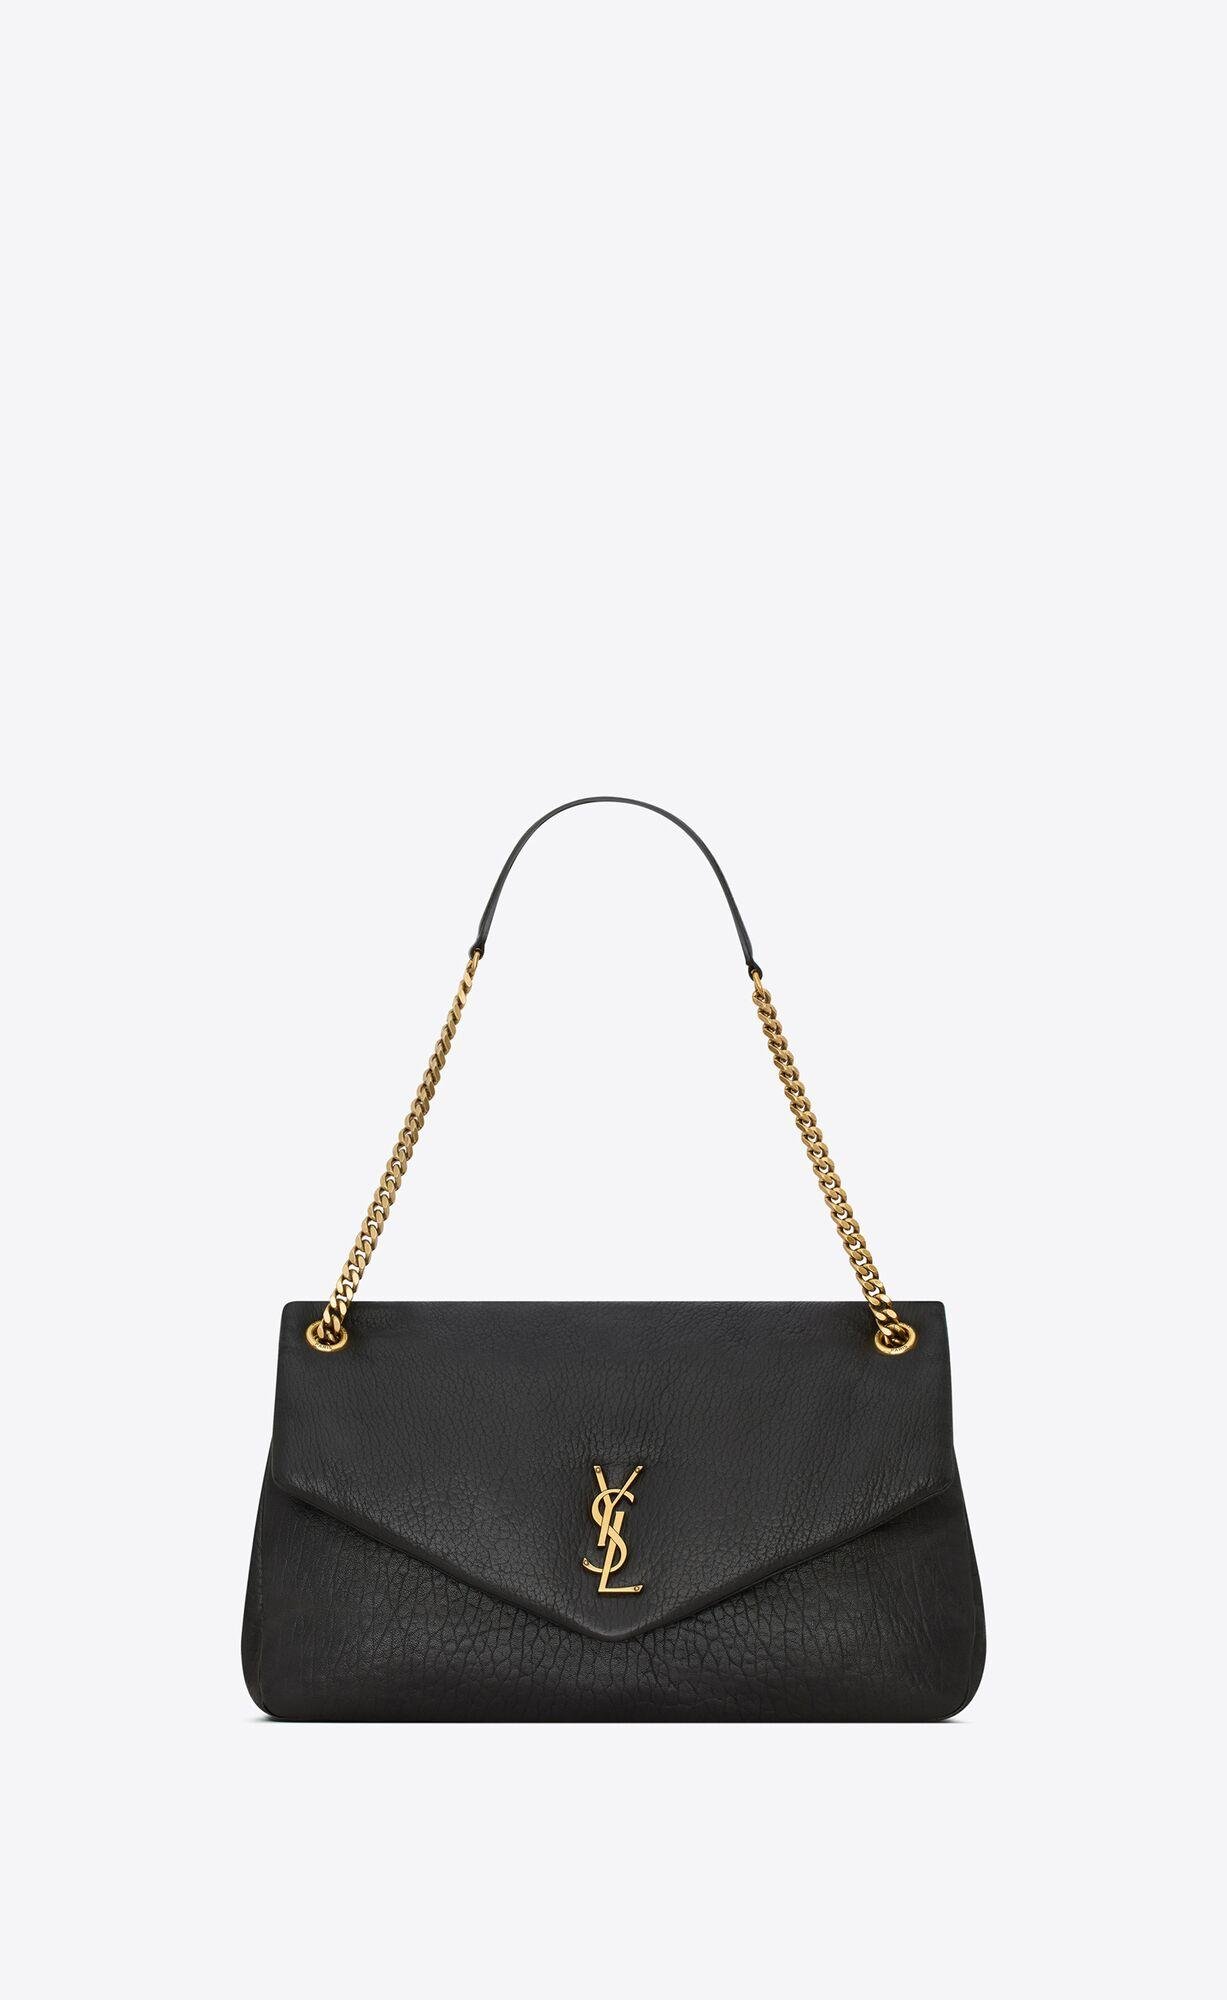 calypso large in grained lambskin by SAINT LAURENT